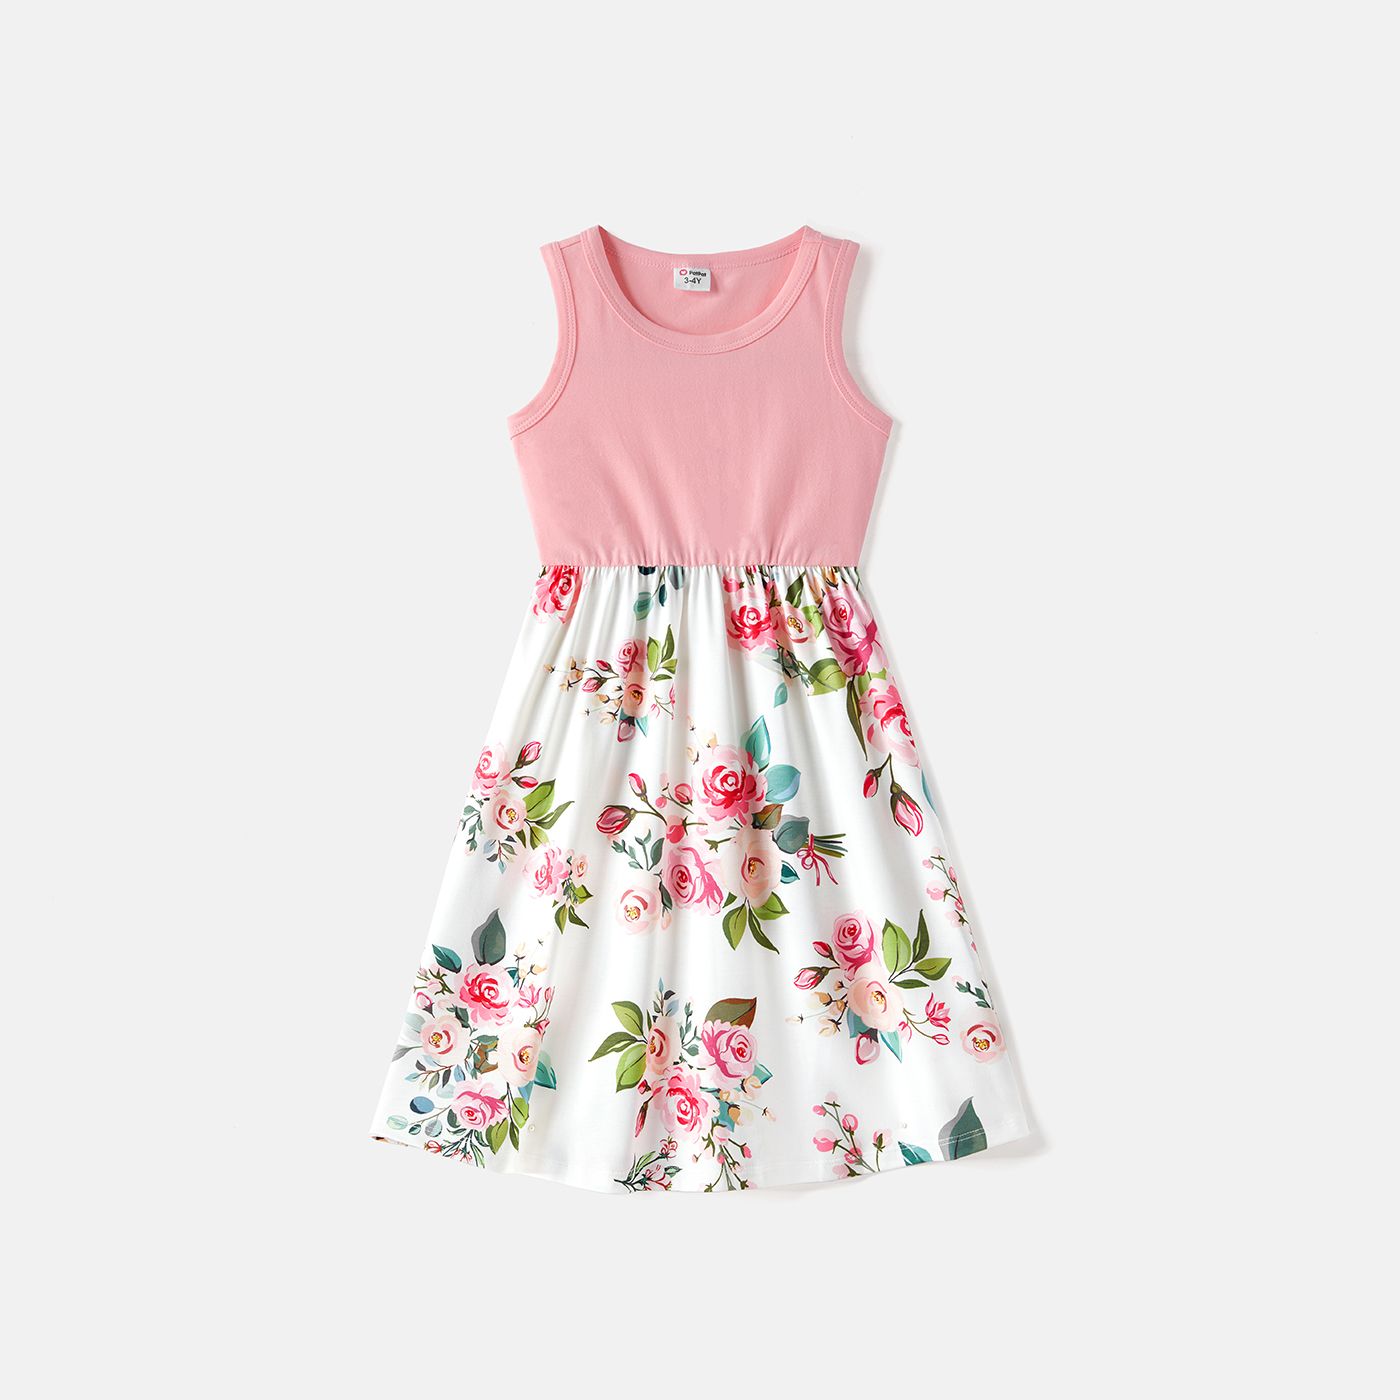 Family Matching 95% Cotton Short-sleeve Colorblock Polo Shirts And Floral Print Naiaâ¢ Spliced Tank Dresses Sets